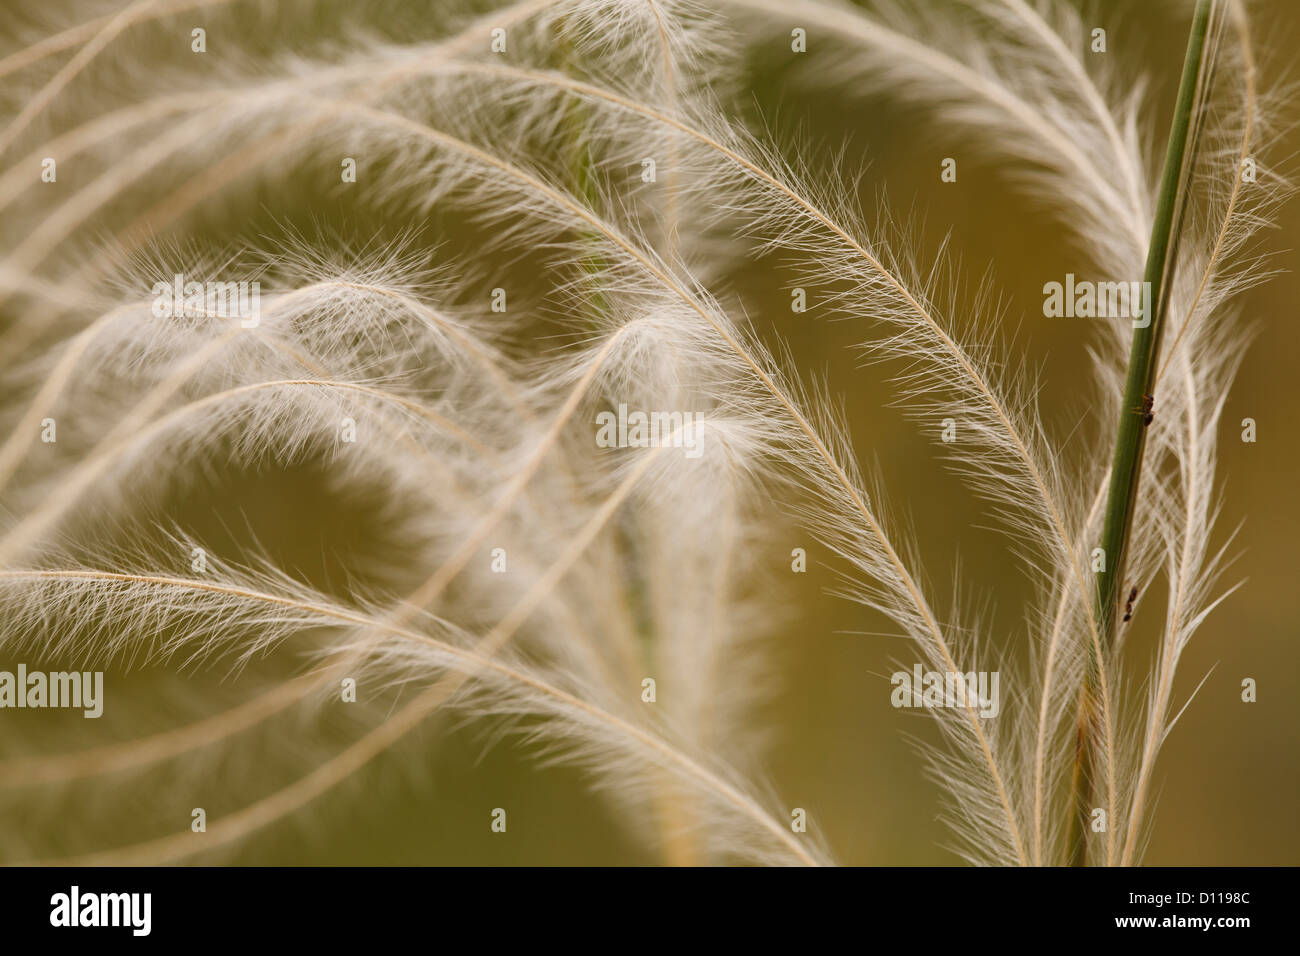 Close-up of the awns of Feather Grass (Stipa pennata). On the Causse de Gramat, Lot region, France. June Stock Photo